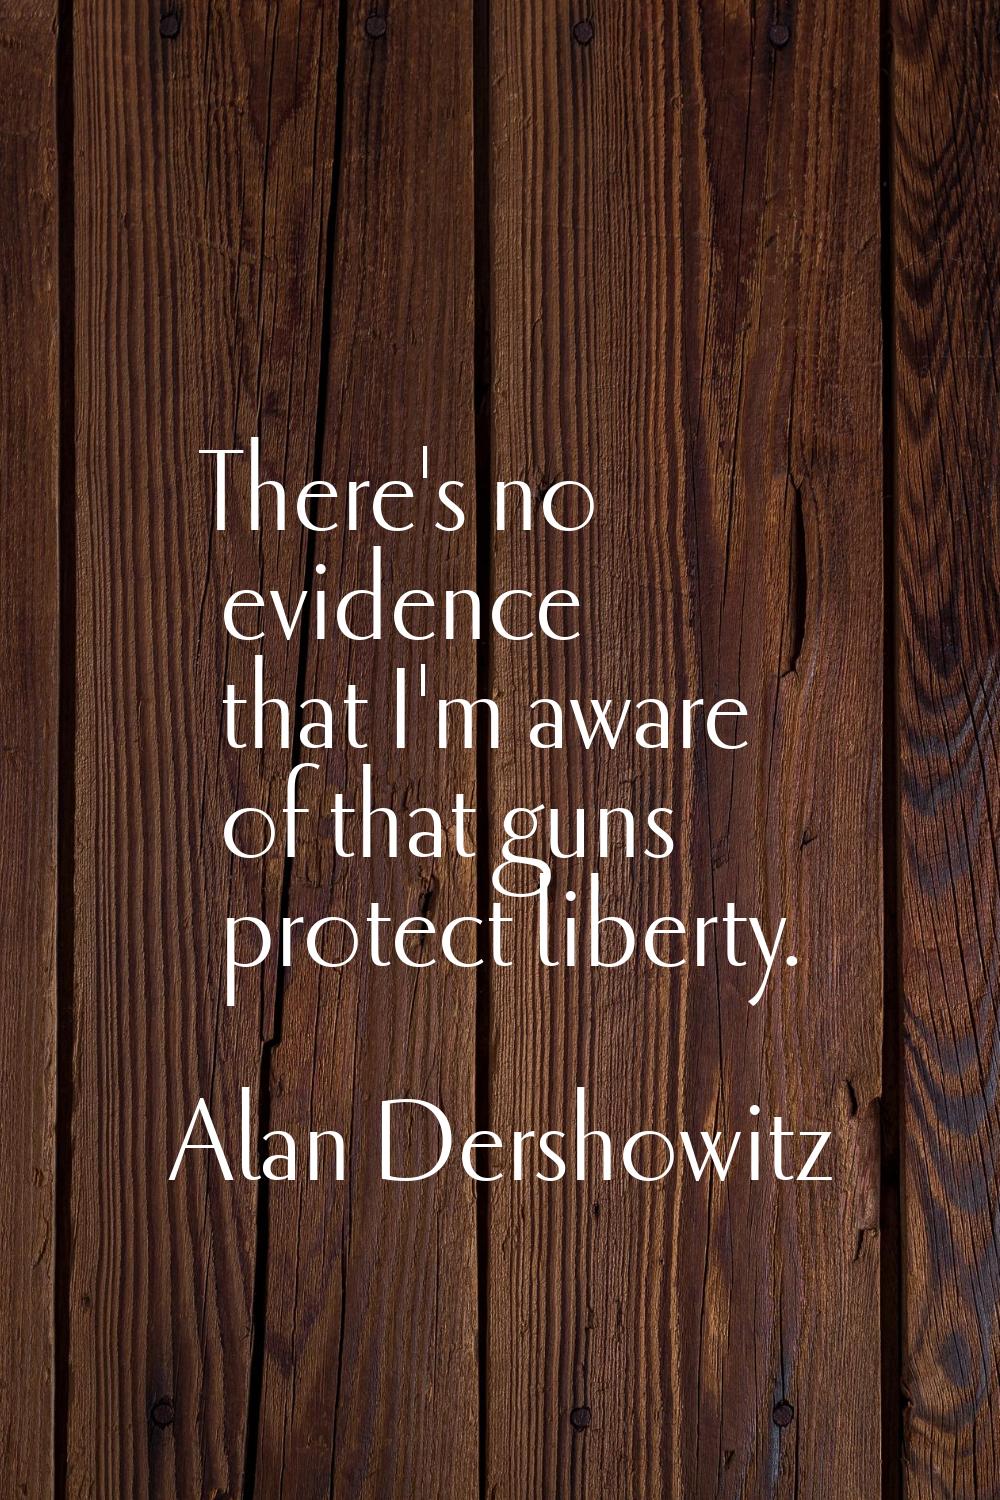 There's no evidence that I'm aware of that guns protect liberty.